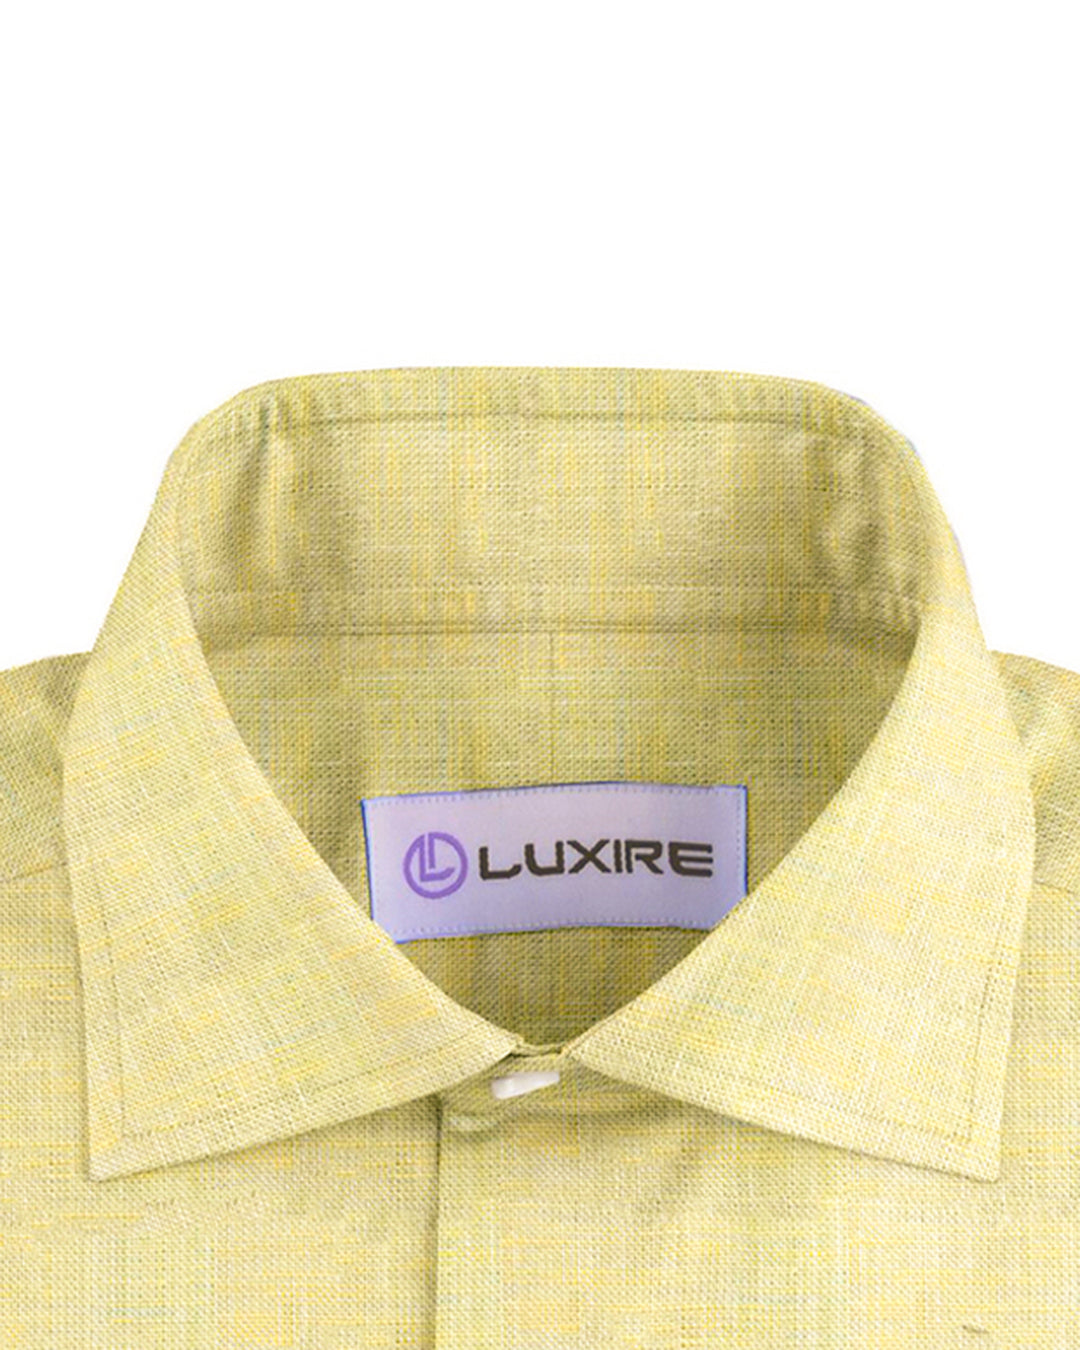 Linen: Pale Yellow End on End